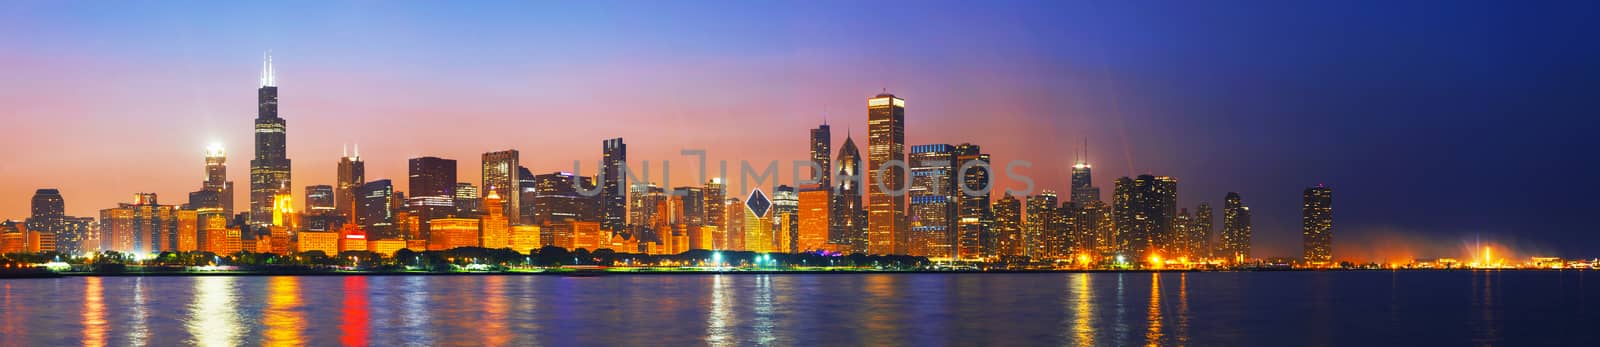 Downtown Chicago, IL at sunset as seen from Lake Michigan